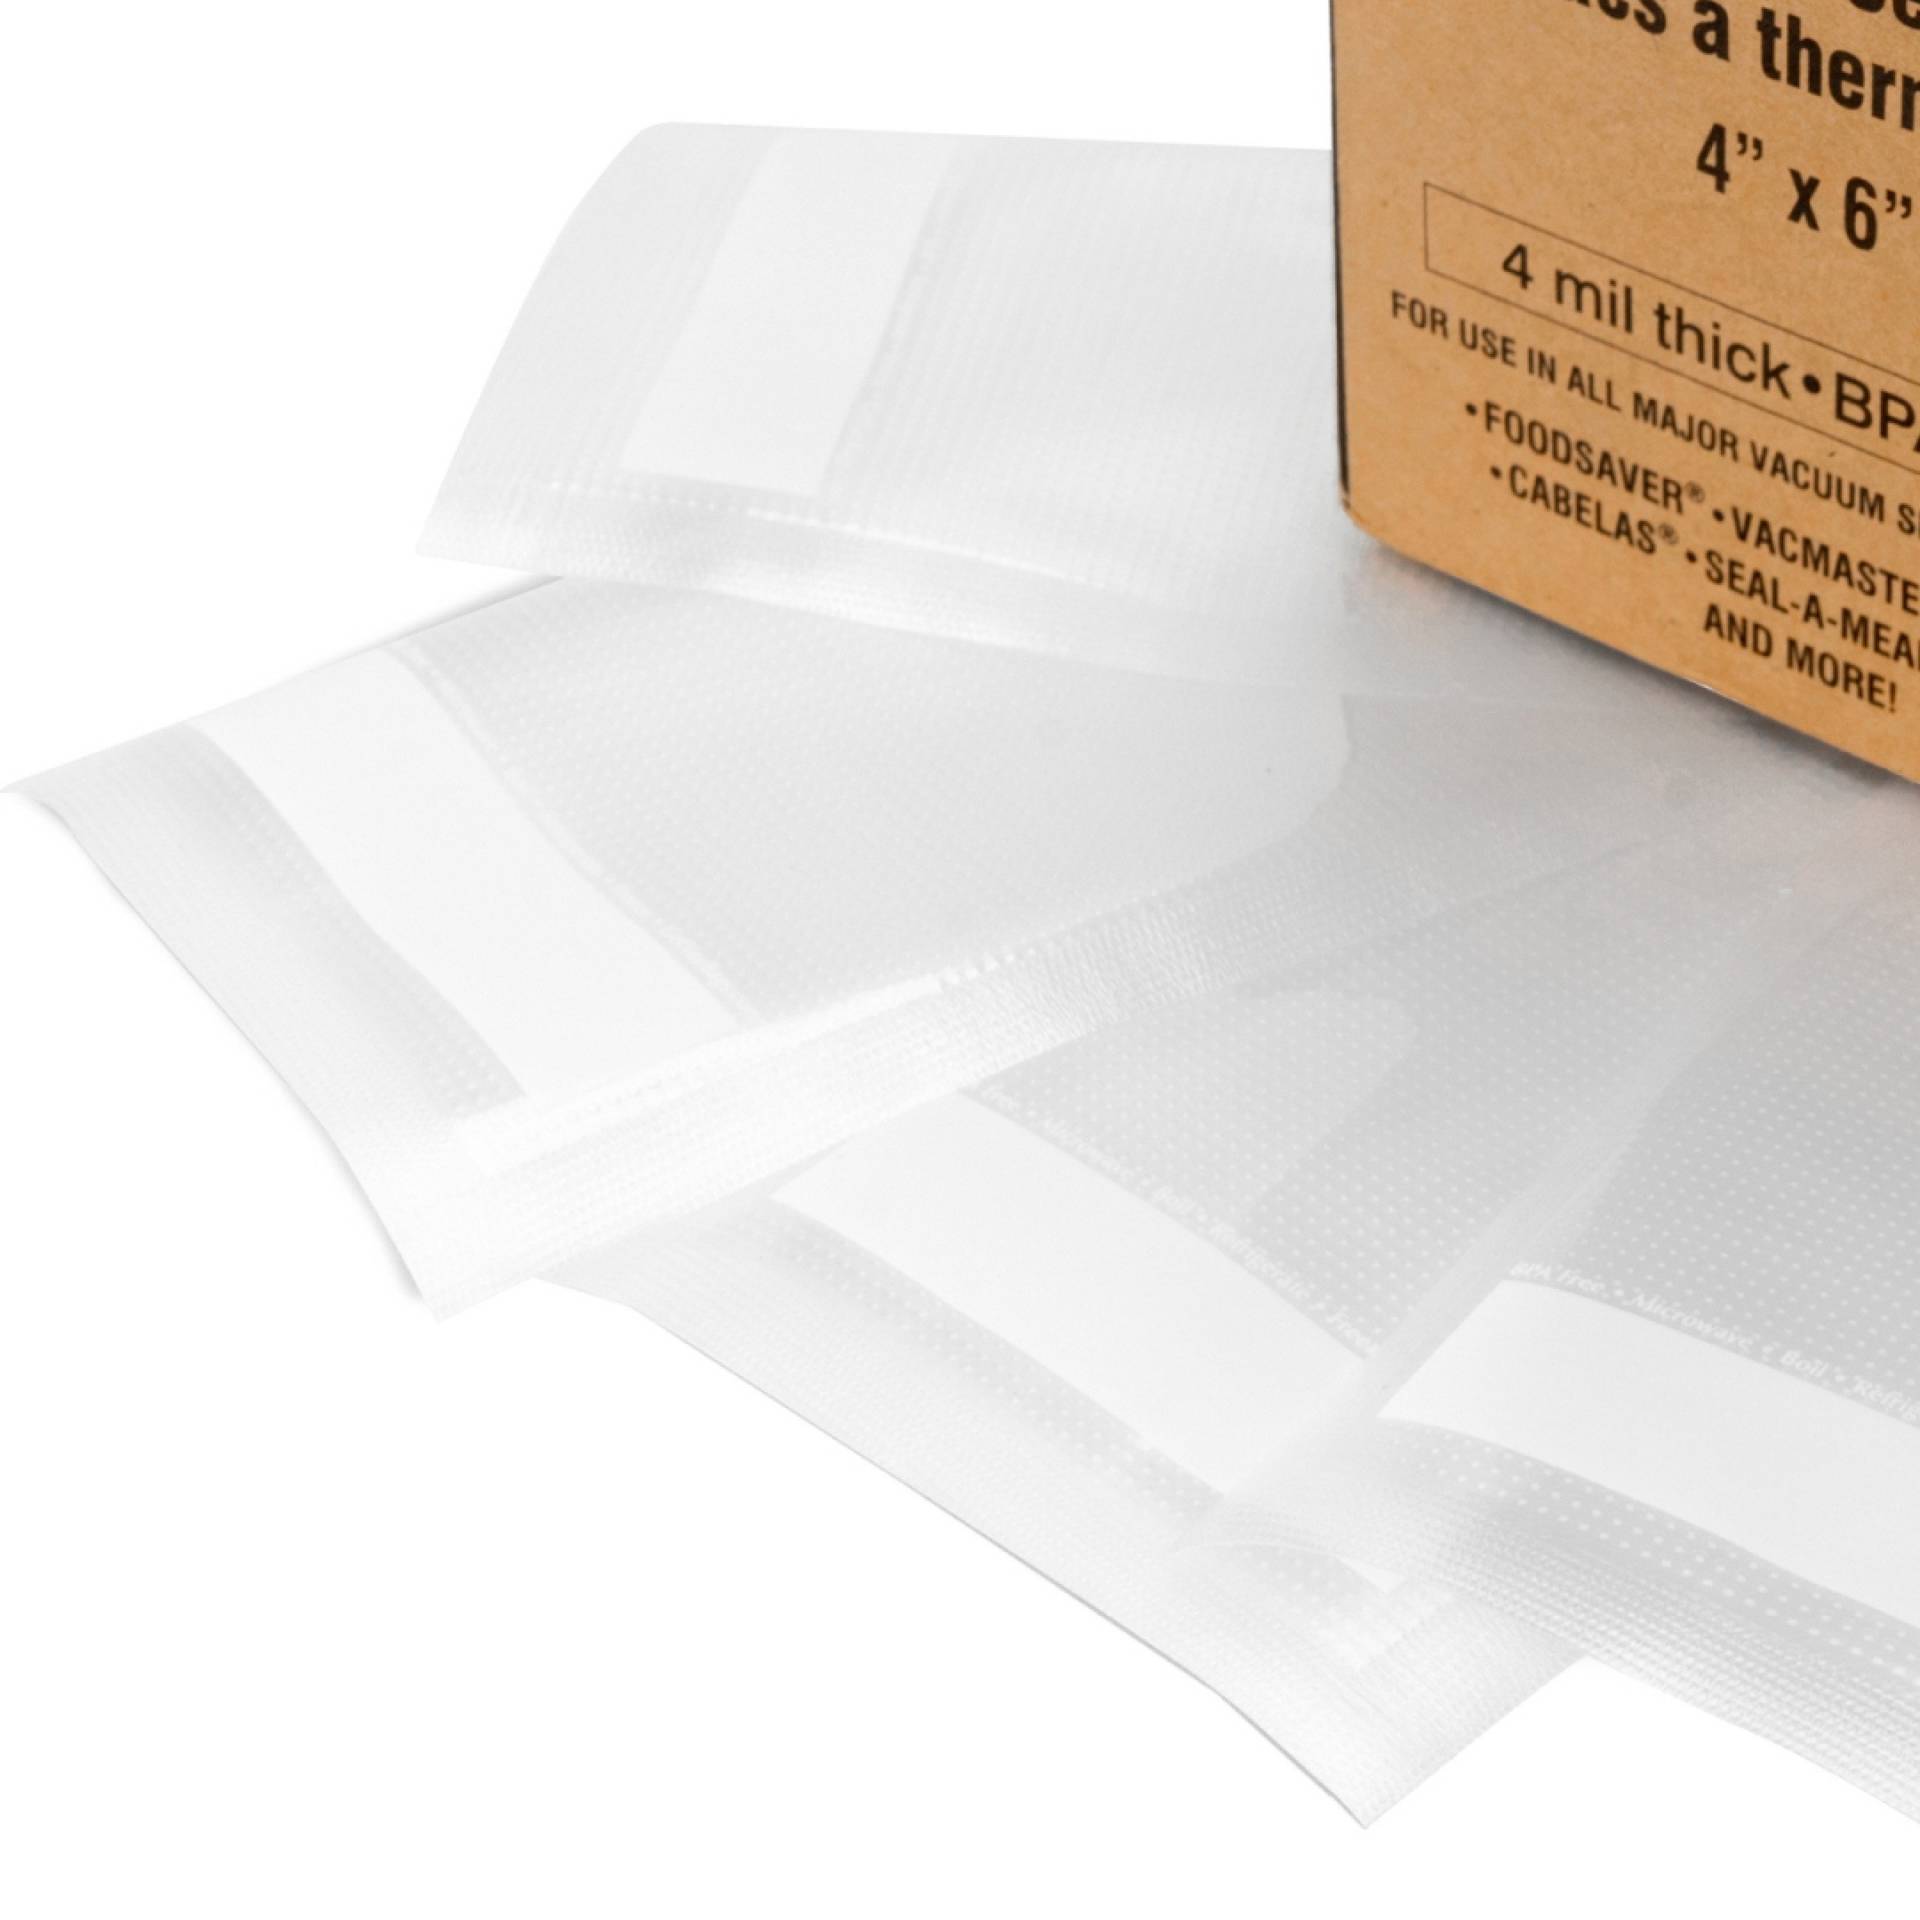 FoodSaver Pint-Size Vacuum-Seal Bags, 28 Count, Clear